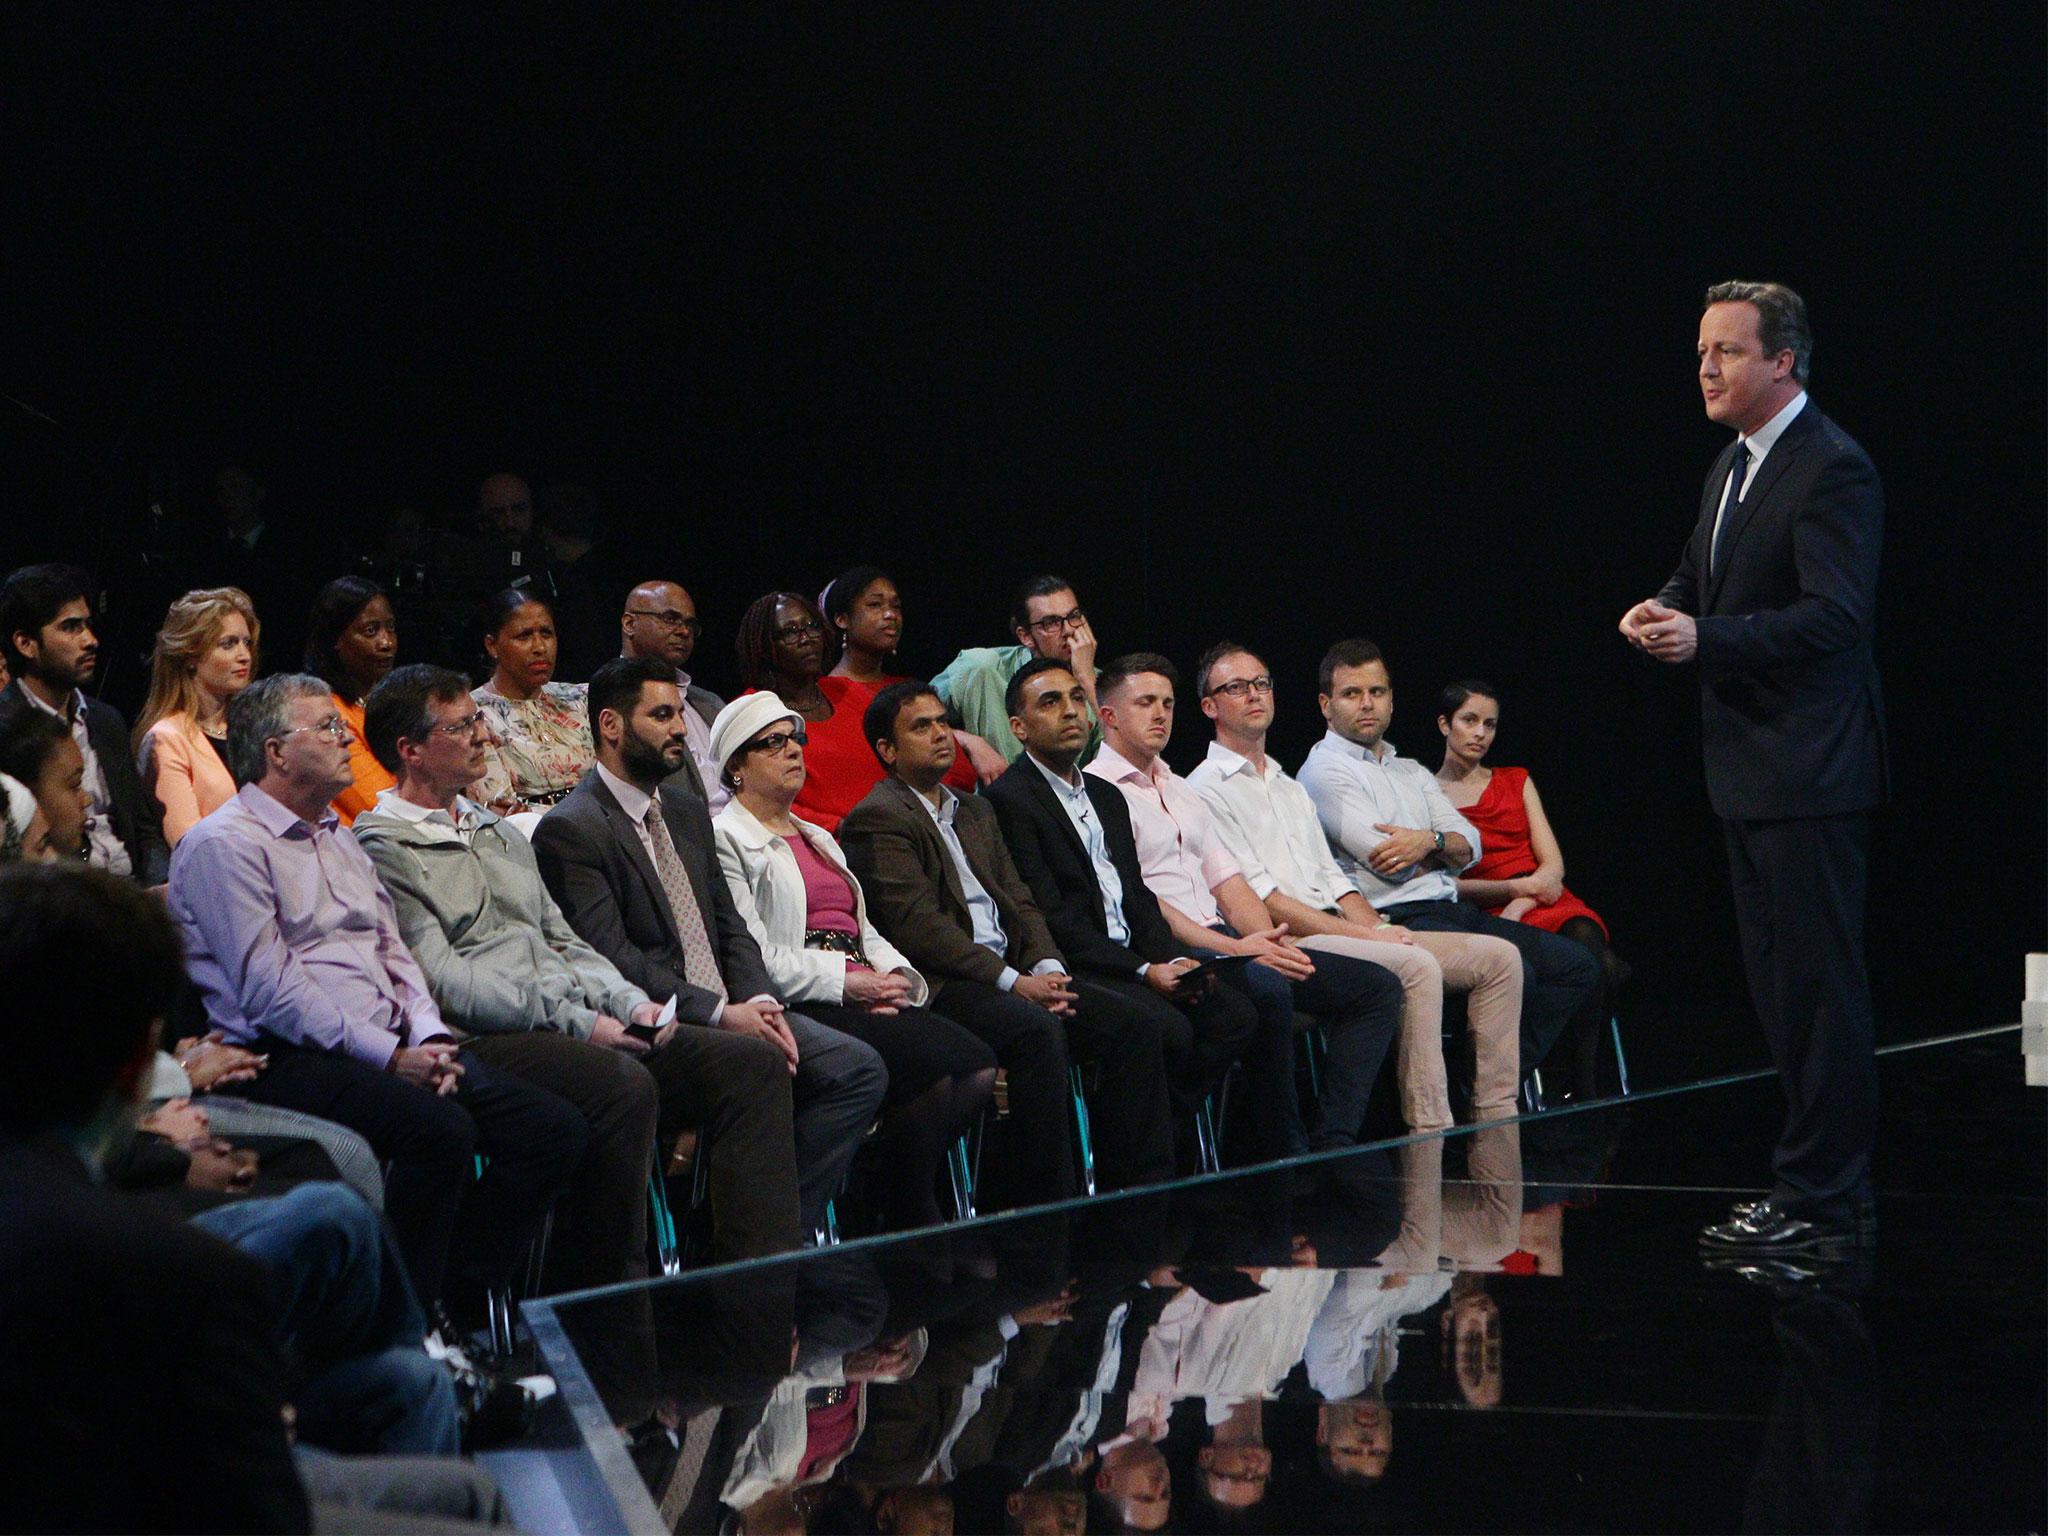 David Cameron refused to take part in debates with Ed Miliband in 2015